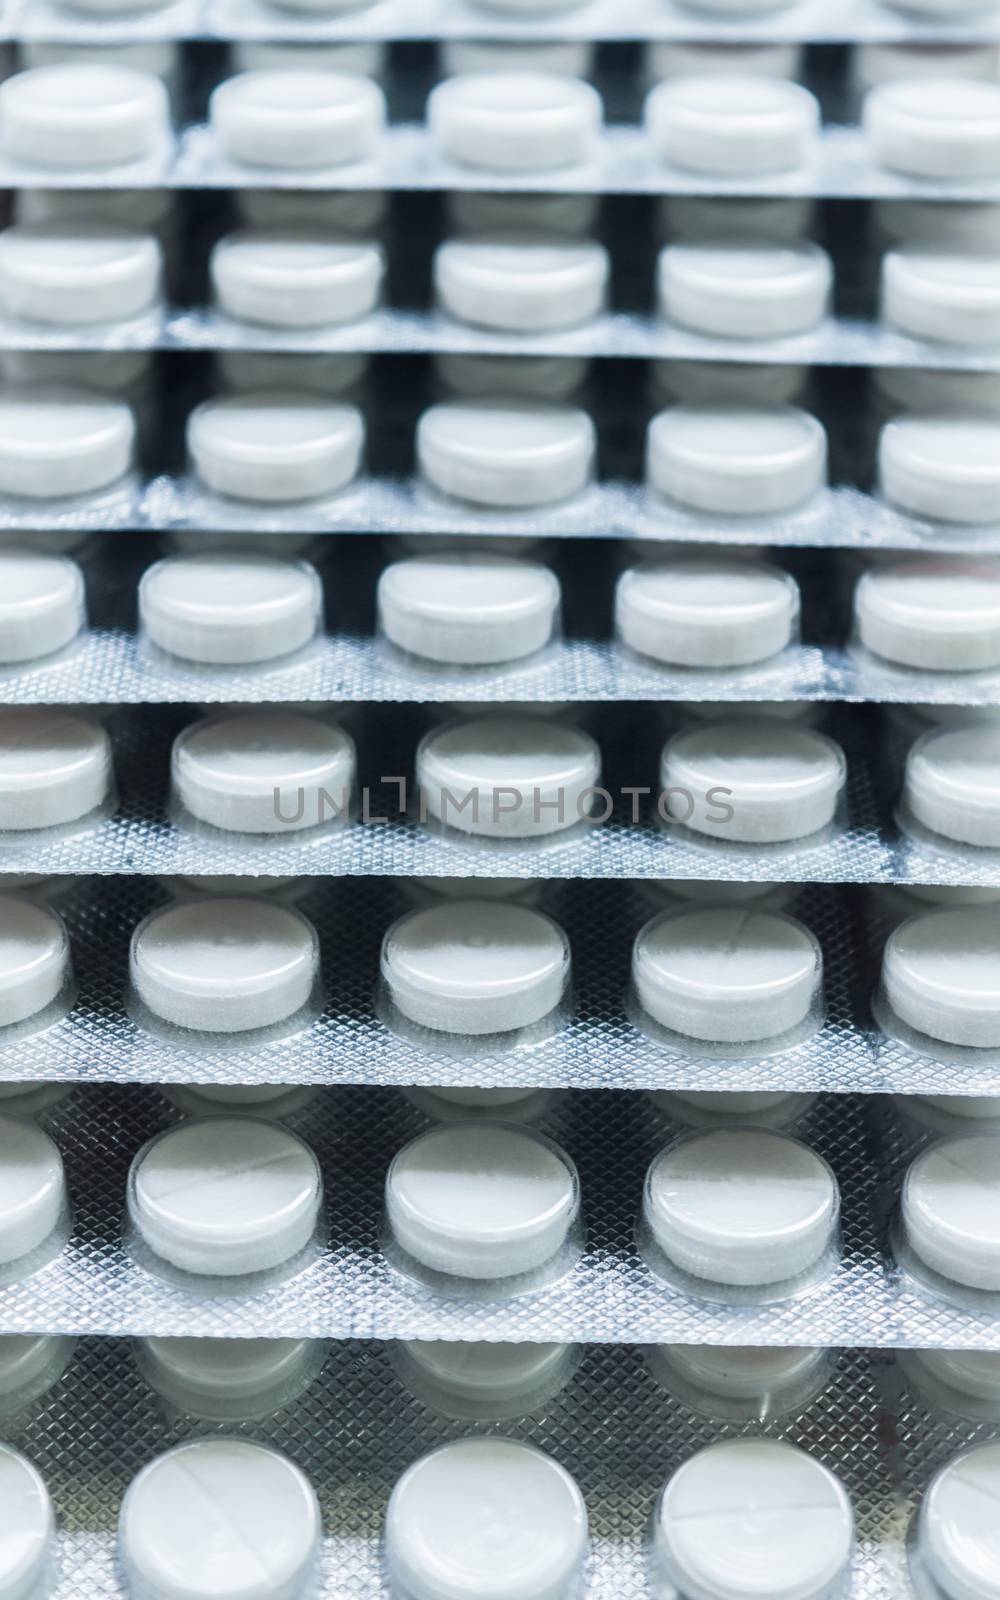 Heap of Capsules packed in blisters, round patterned shaped medicine tablet or antibiotic pills. Medical Pharmacy theme. Close up with copy space. by sudiptabhowmick